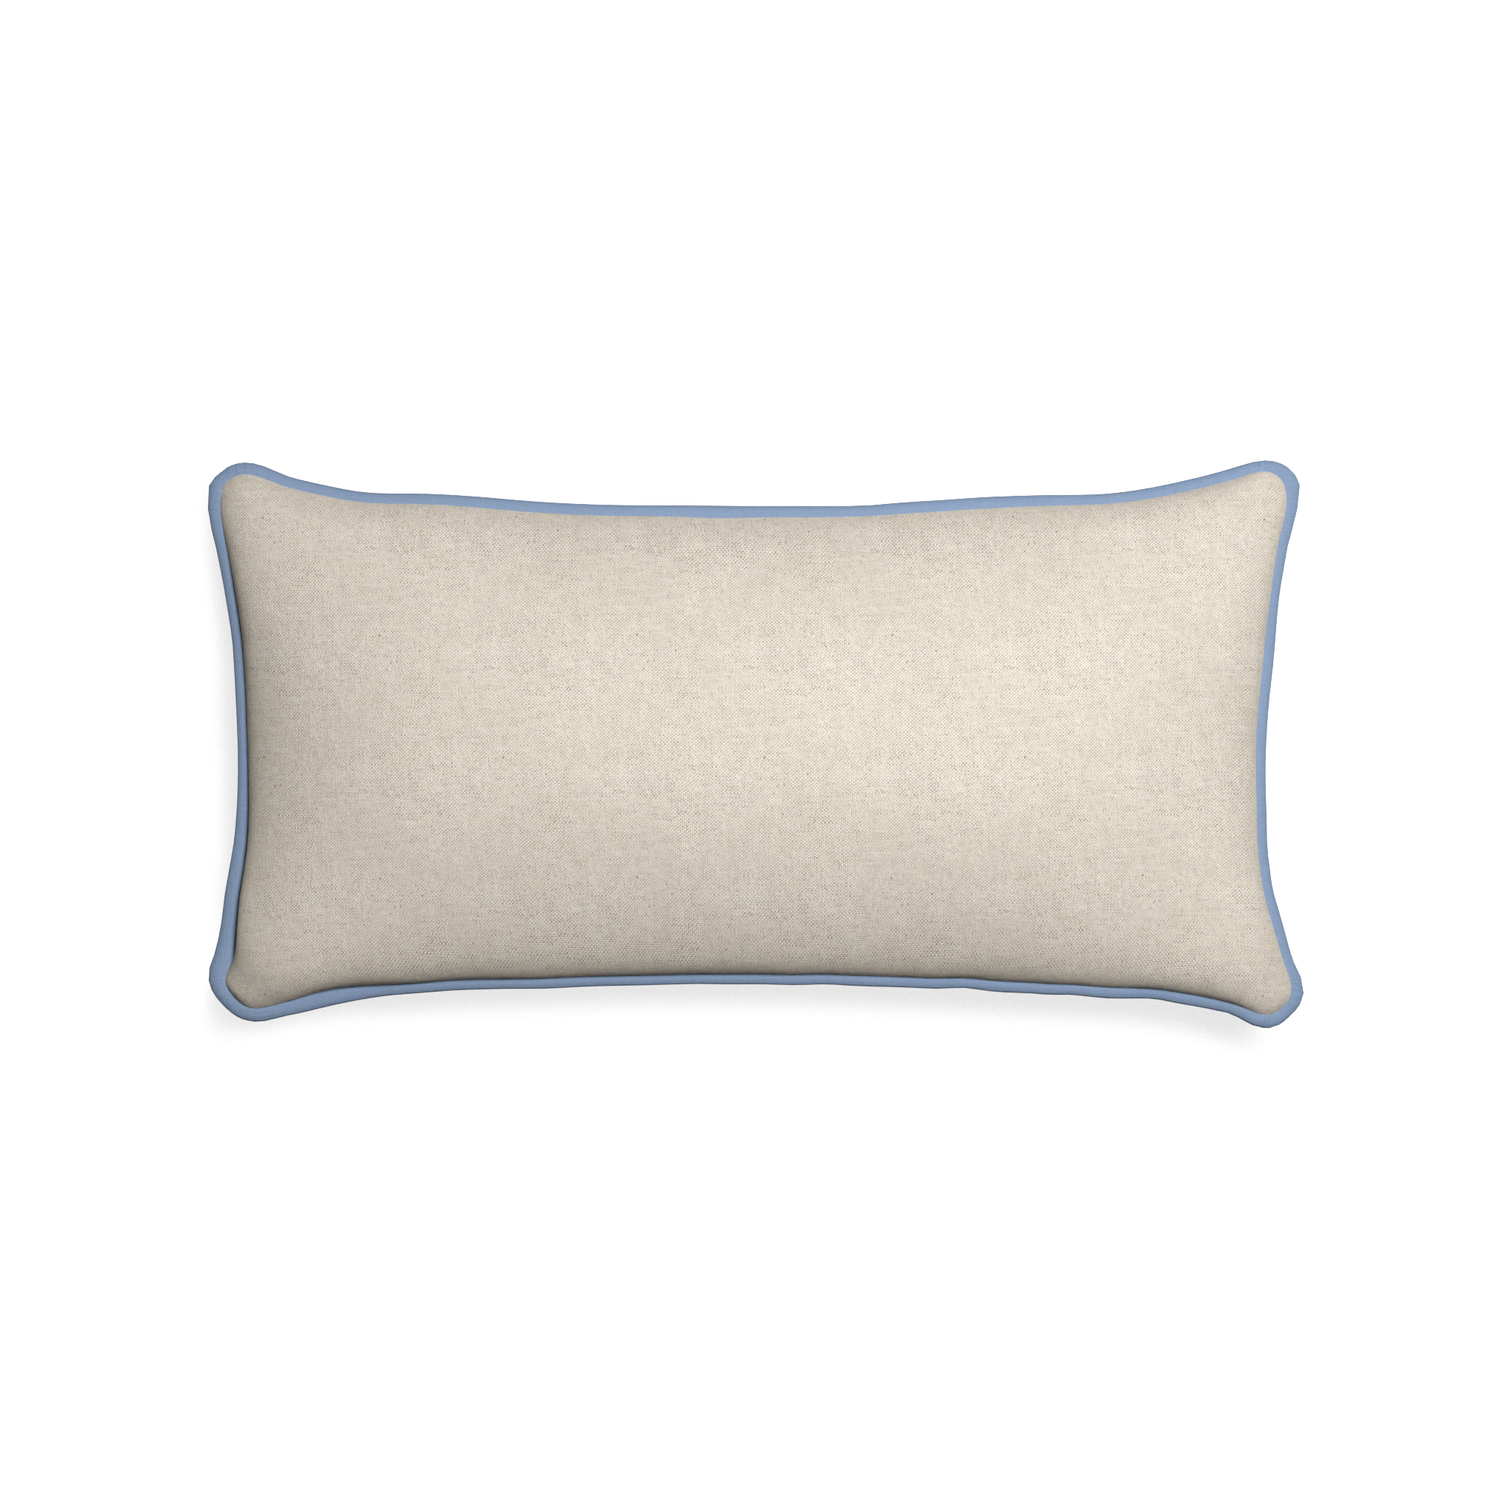 Midi-lumbar oat custom light brownpillow with sky piping on white background